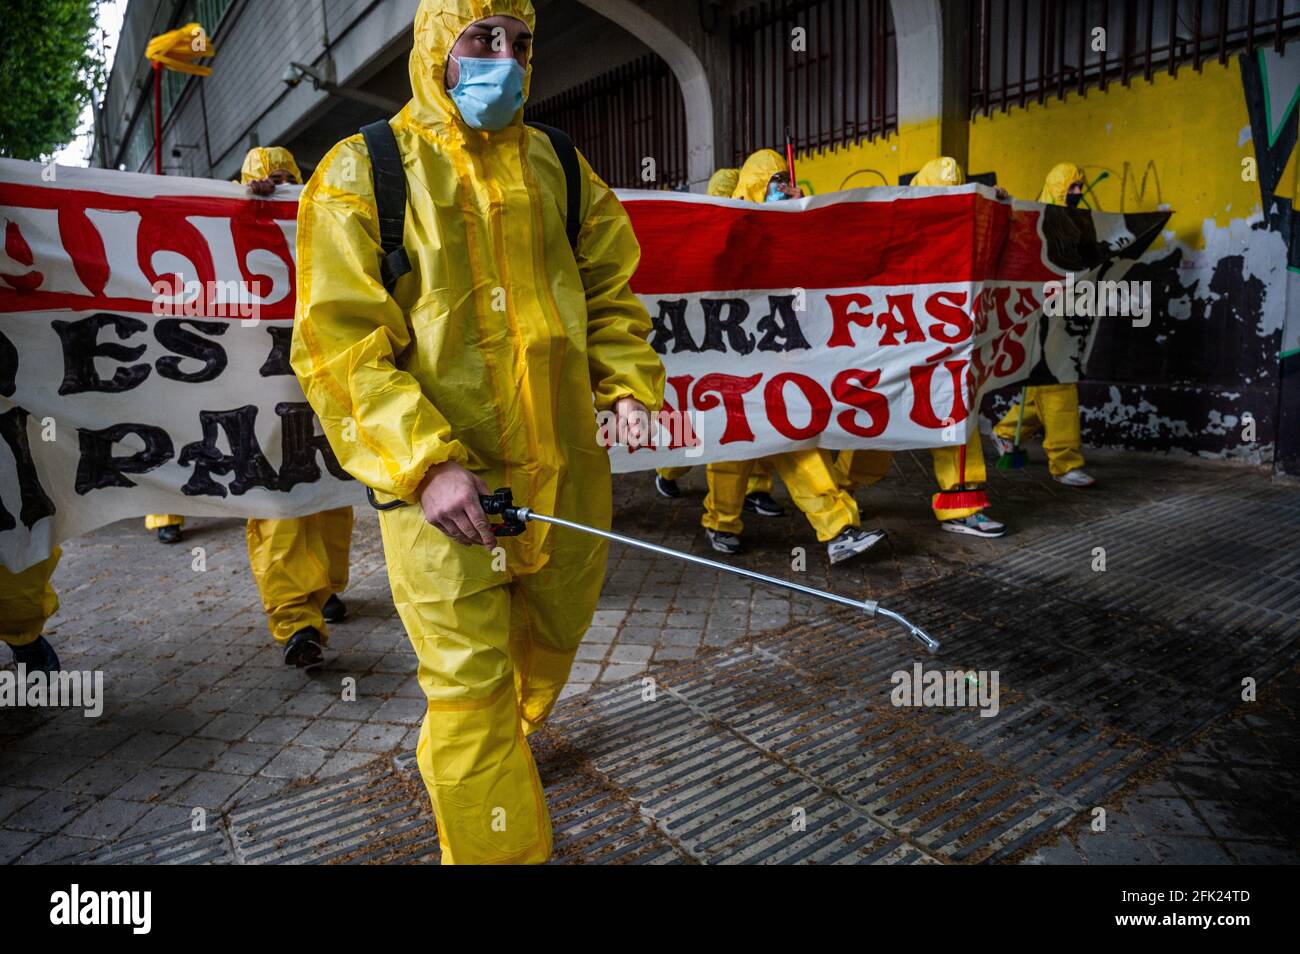 Madrid, Spain. 27th Apr, 2021. Protesters wearing personal protective equipment carrying a banner and disinfection equipment to protest against the last visit to a match in the Rayo Vallecano Stadium of Santiago Abascal, leader of far right wing VOX party, and Rocio Monasterio, candidate for the next regional elections of Madrid. Protesters, members of Bukaneros group, are performing an action under the slogan 'let's disinfect our stadium' shouting slogans against fascism and against far right wing VOX party. Credit: Marcos del Mazo/Alamy Live News Stock Photo